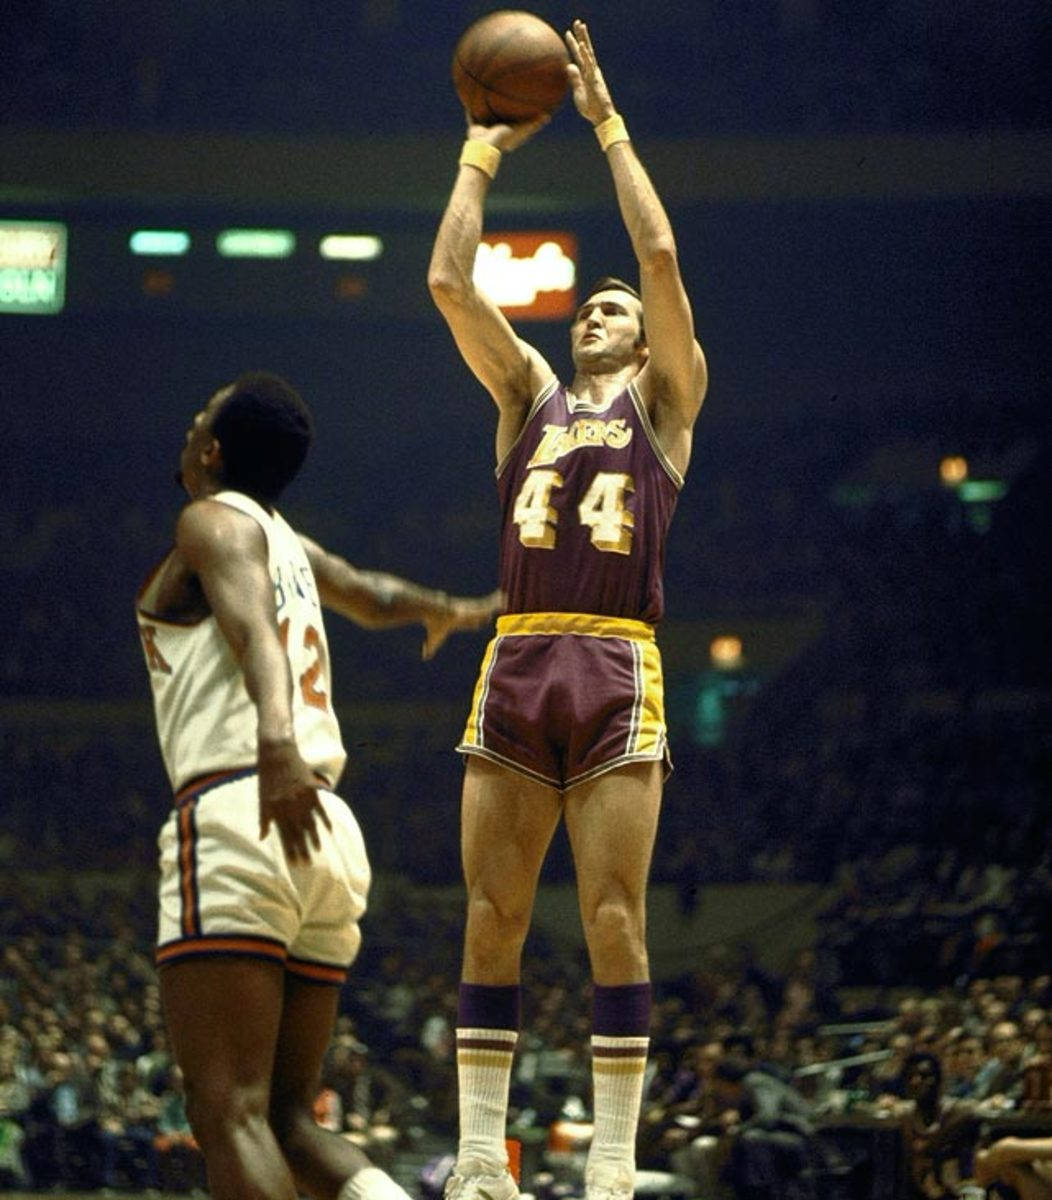 Jerry West 1969 Finals Highlights, With 44 days left for #KiaTipOff19,  check out the 1969 #NBAFinals mixtape of the Lakers' #44, Jerry West!, By  NBA